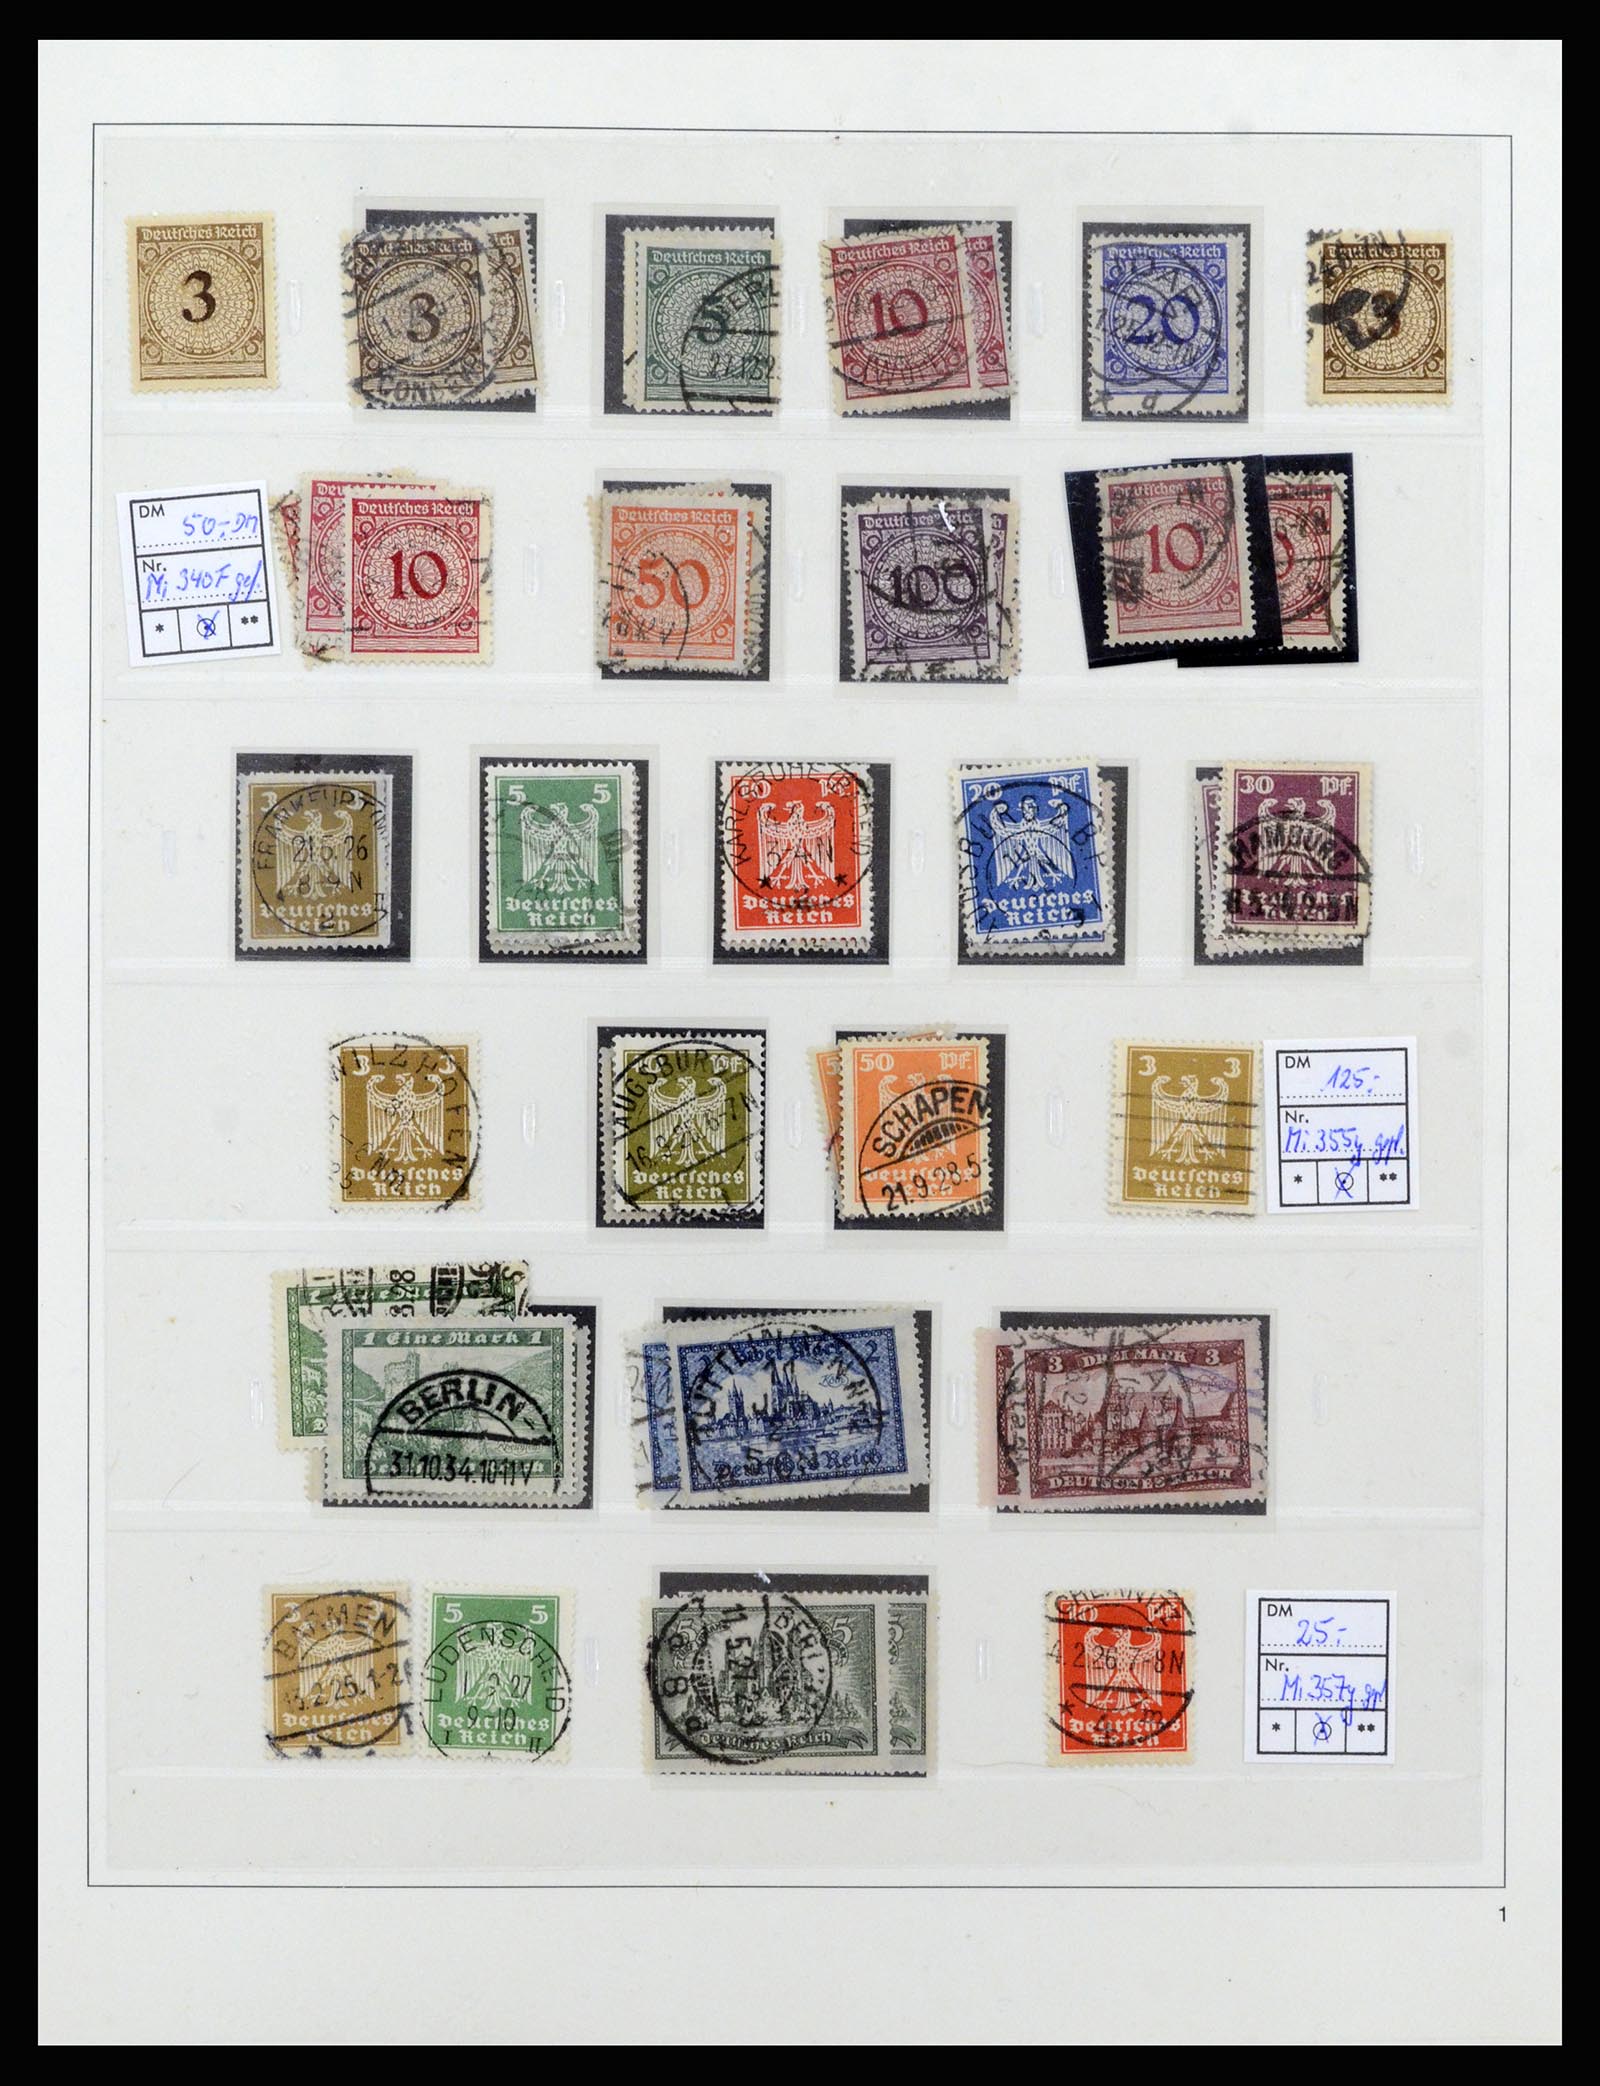 37120 001 - Stamp collection 37120 Germany Reich specialised 1923-1940.